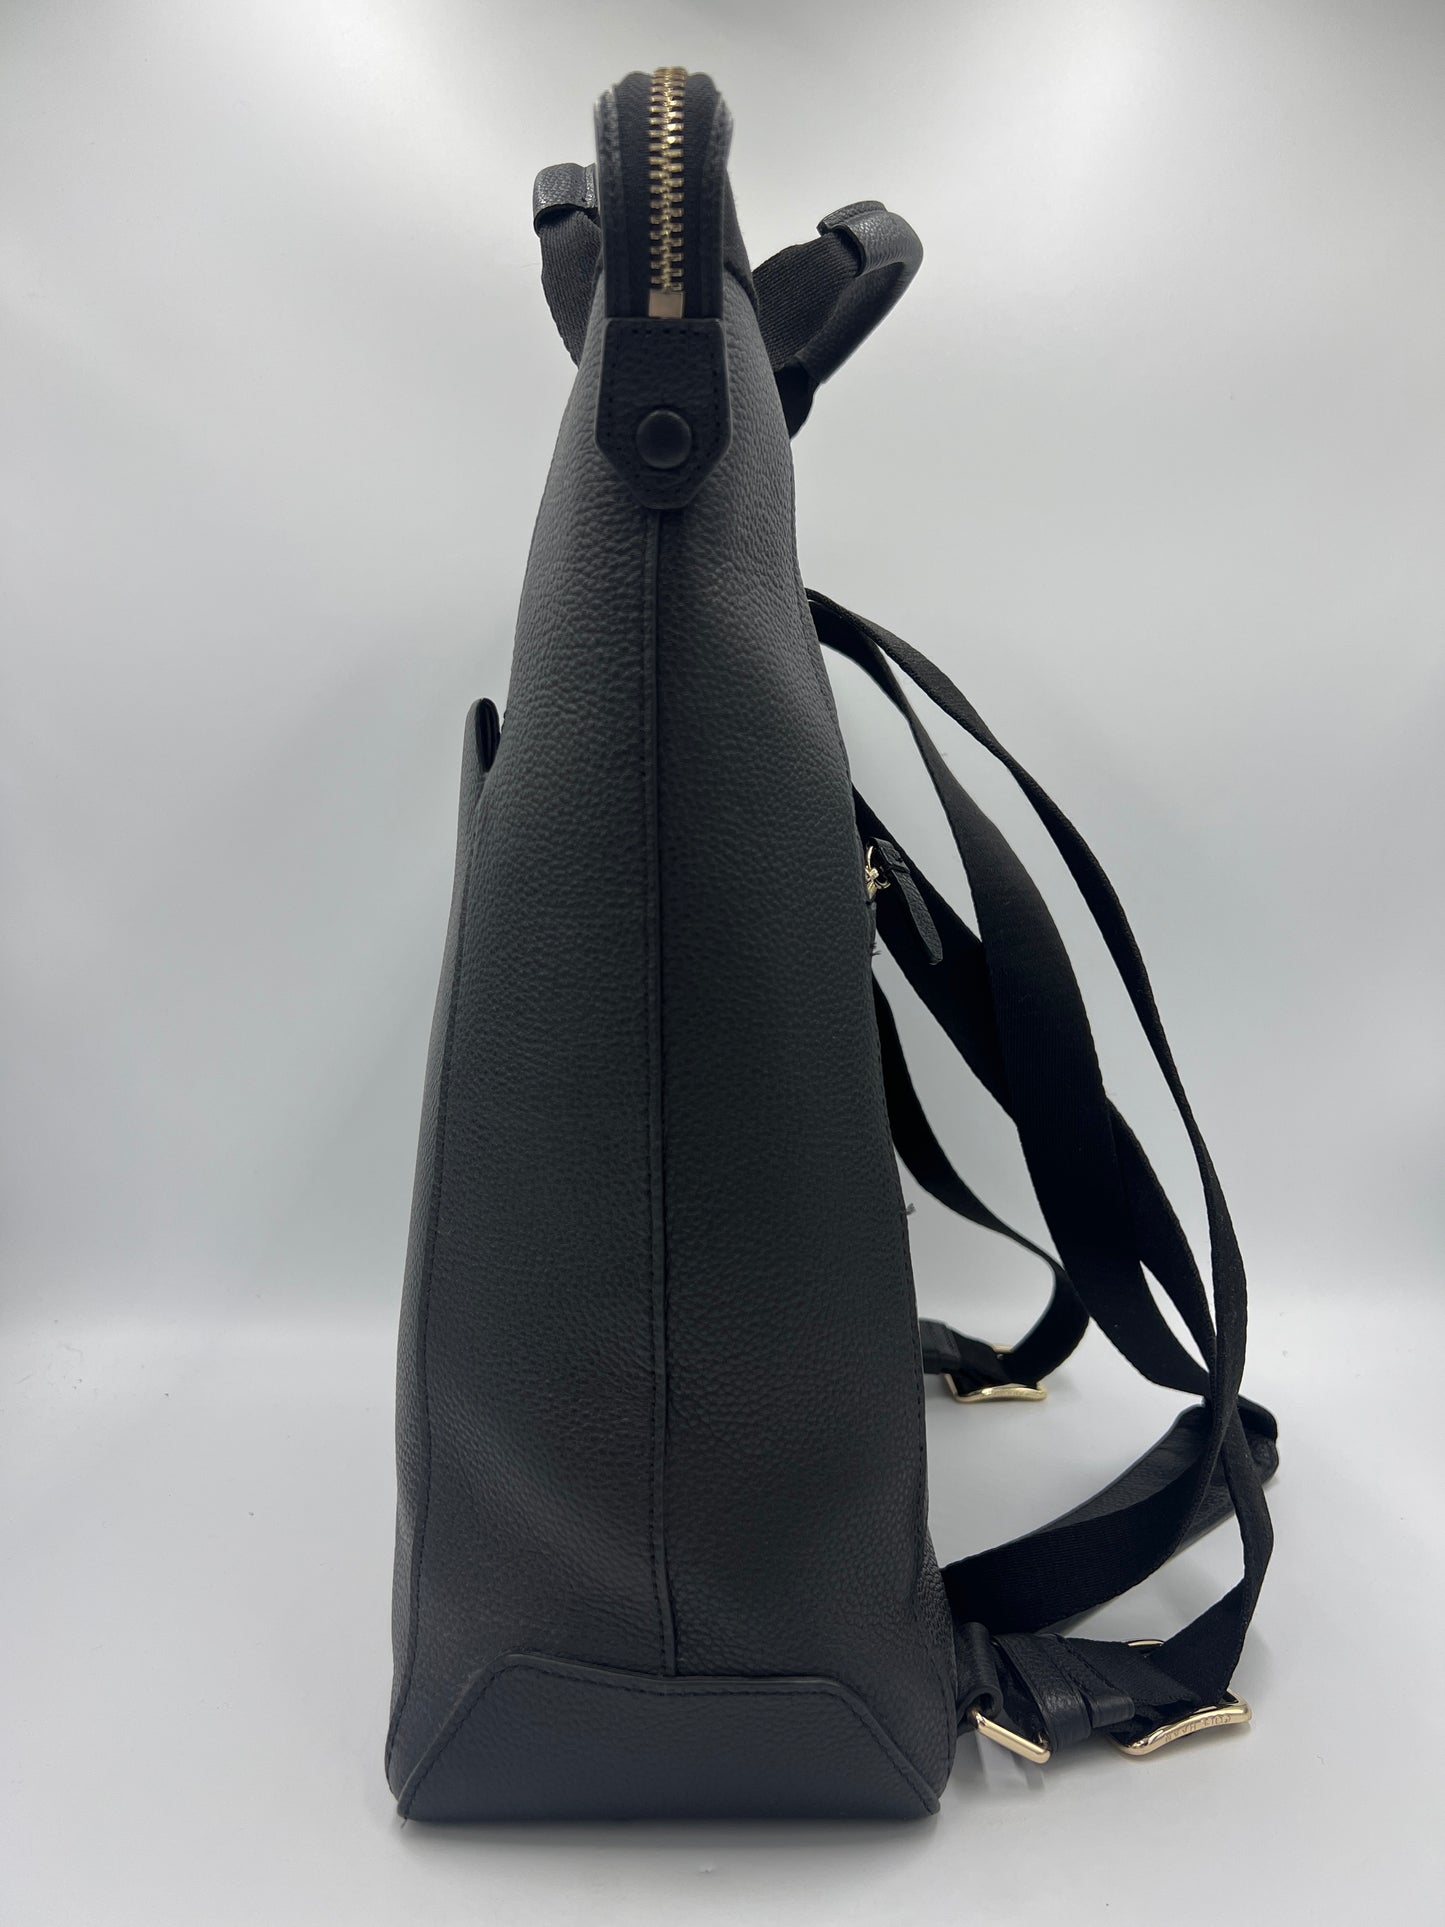 New! Backpack Designer By Cole-haan  Size: Large